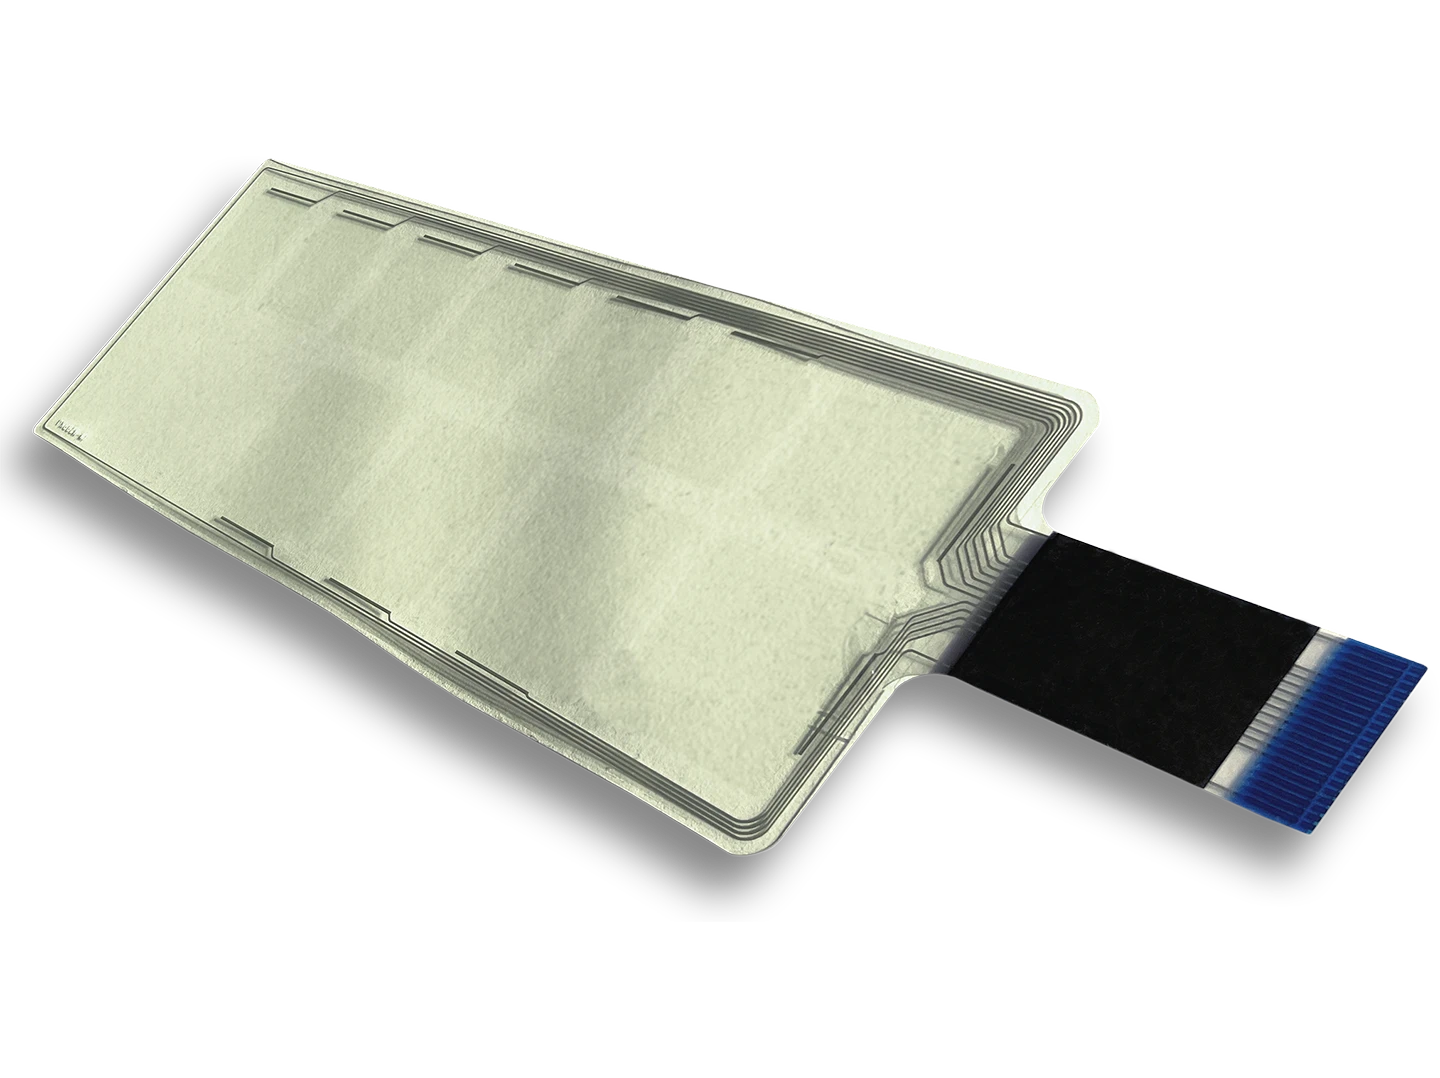 Prototype & Manufacturer of Capacitive Touch Membrane Switch Solutions